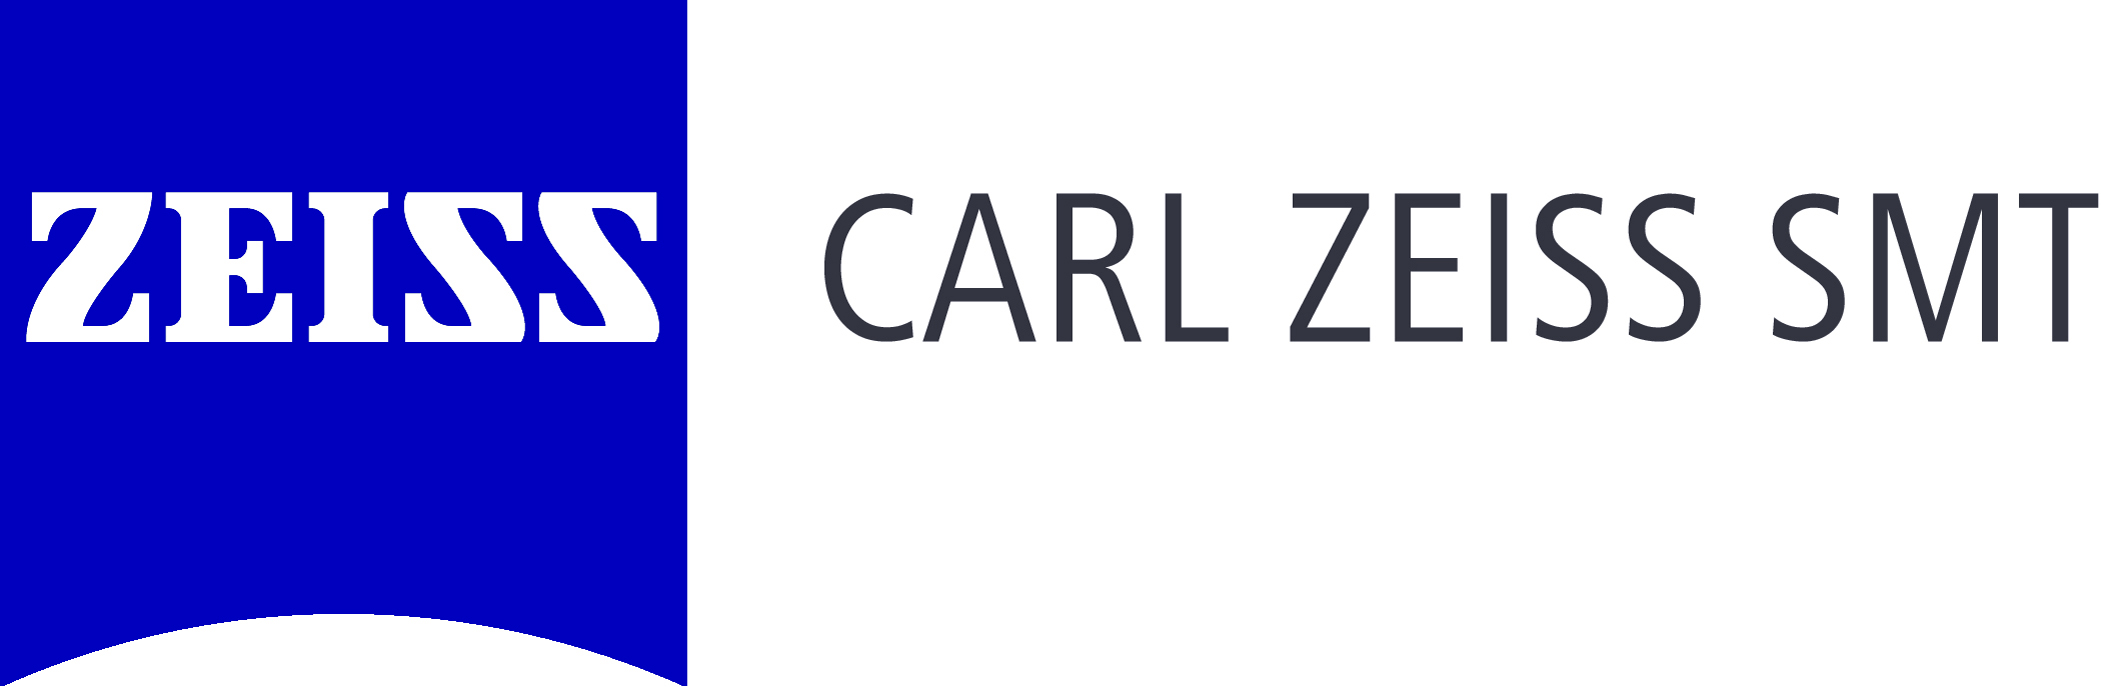 New Zeiss Logo - Carl Zeiss PNG Transparent Carl Zeiss.PNG Images. | PlusPNG